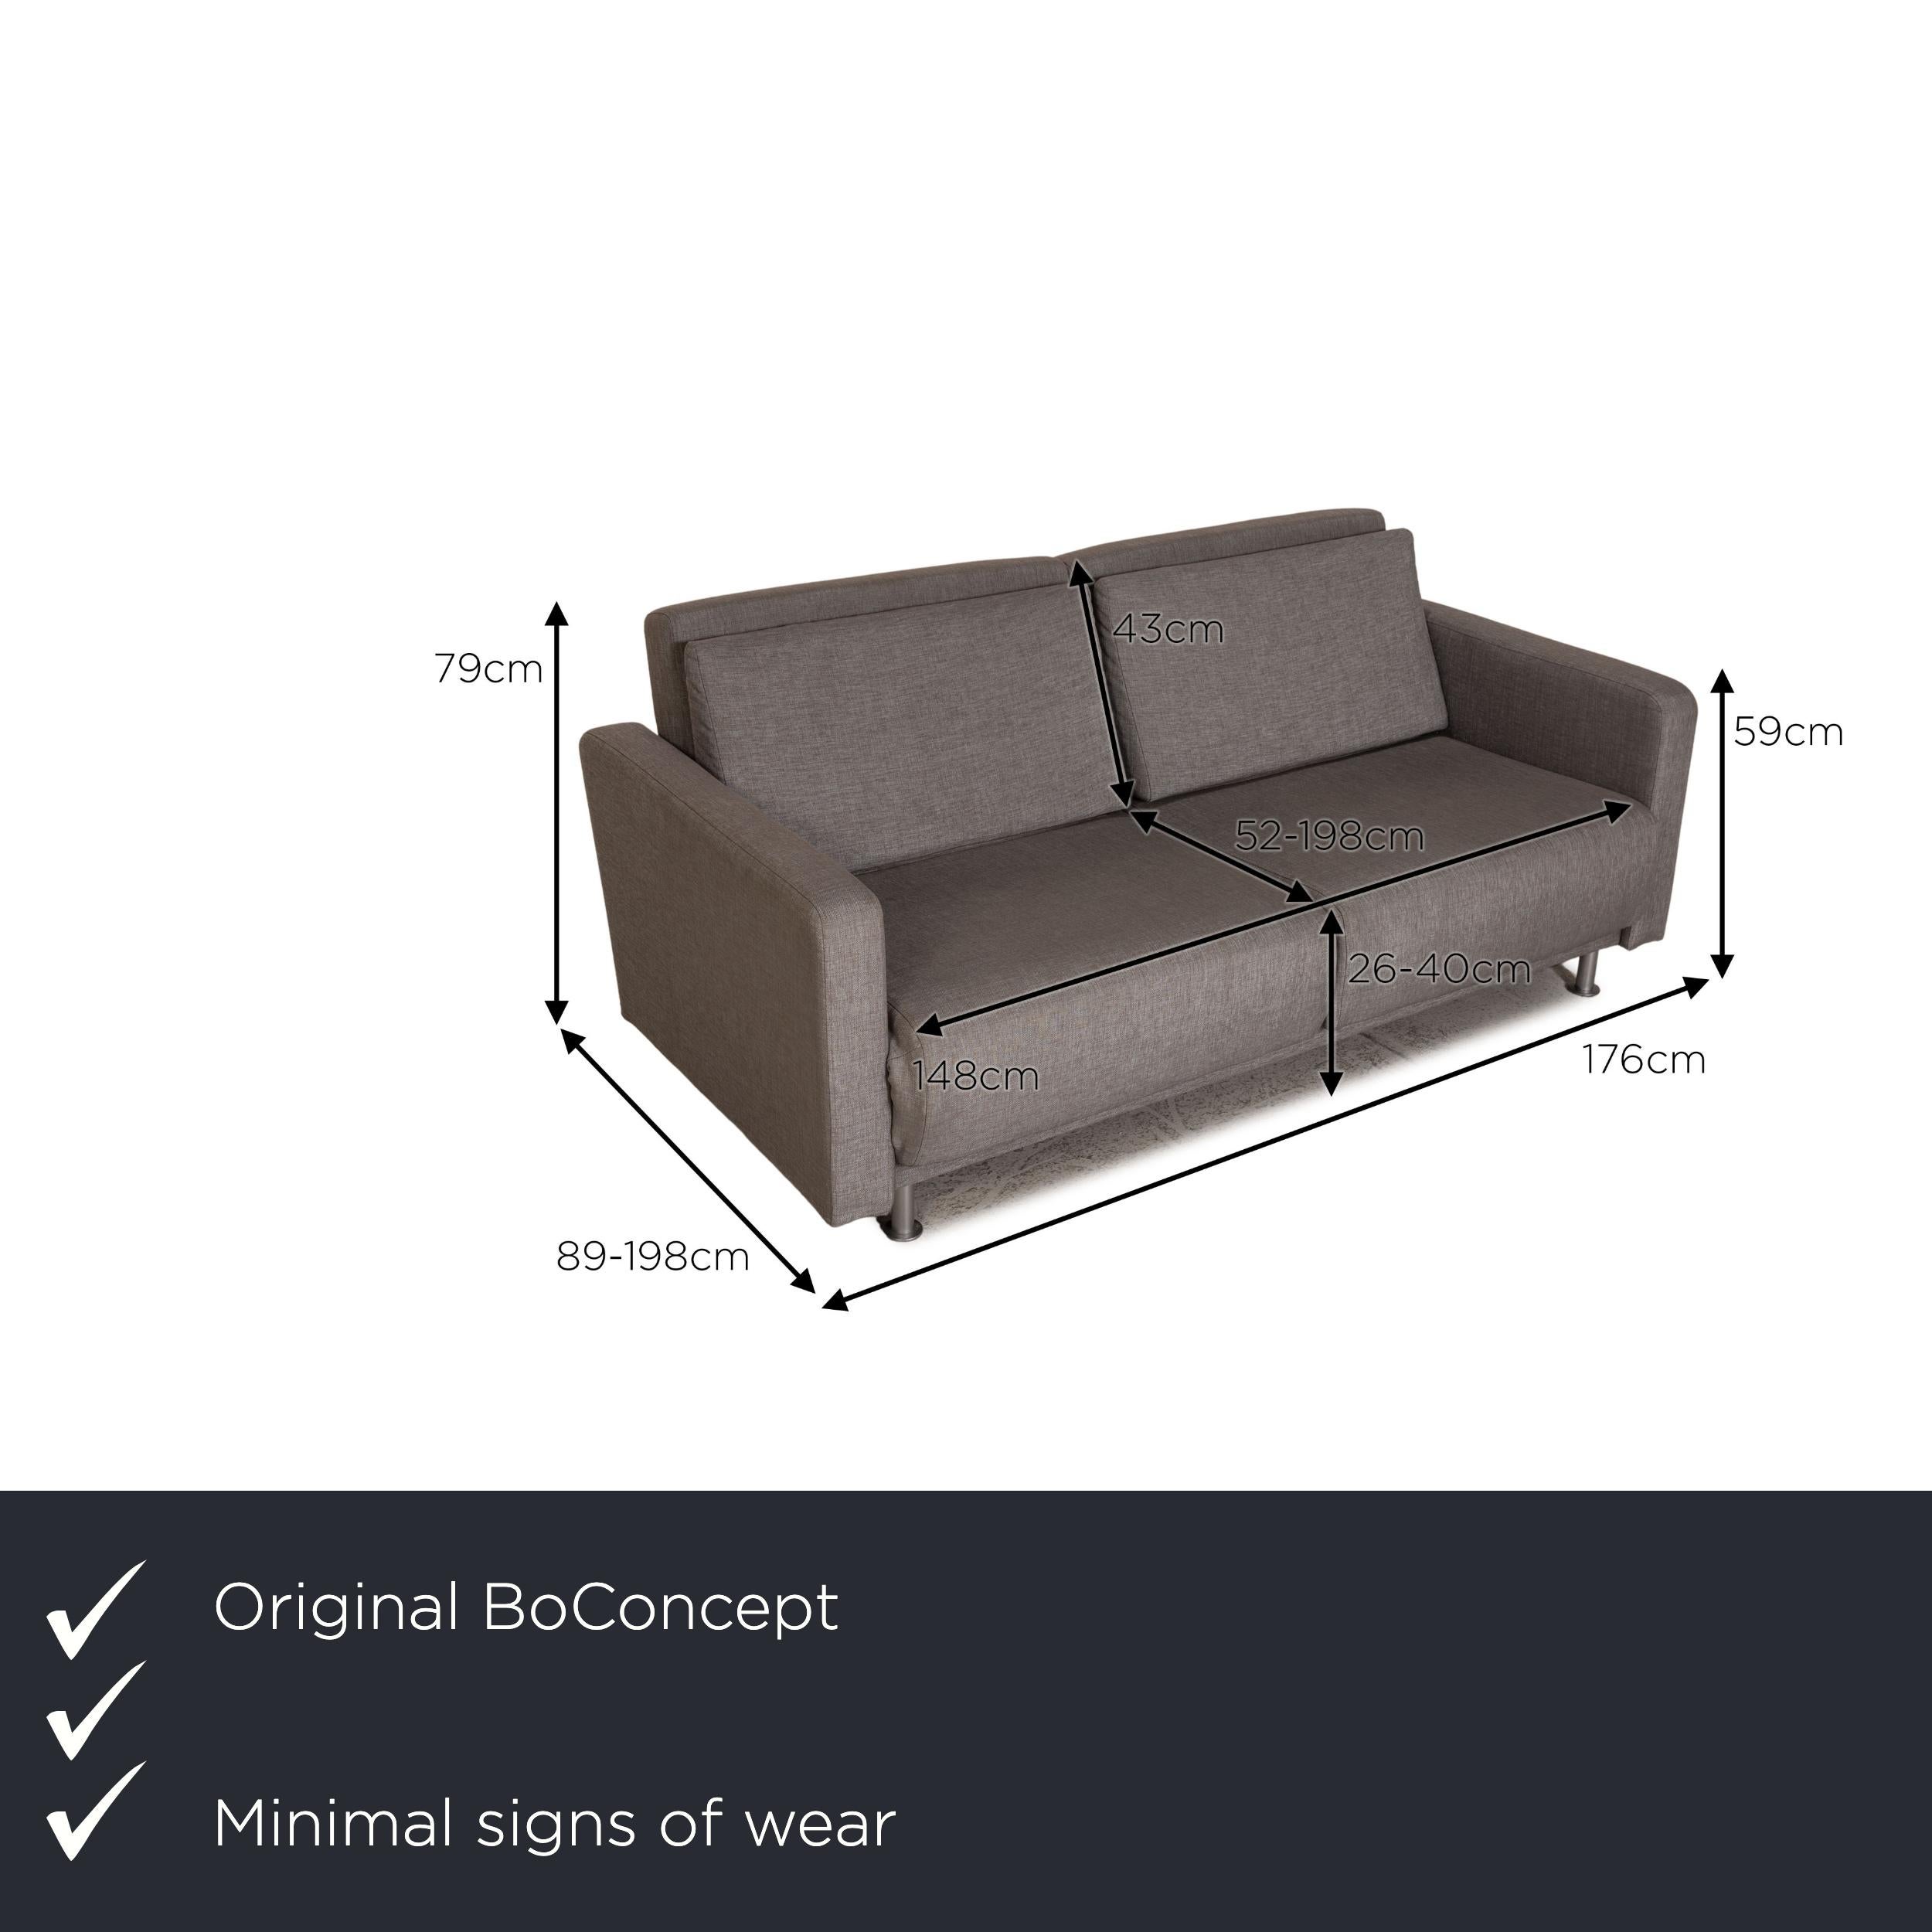 We present to you a BoConcept Melo sofa fabric gray two-seater couch function sleeping function.

Product measurements in centimeters:

Depth: 89
Width: 176
Height: 79
Seat height: 26
Rest height: 59
Seat depth: 52
Seat width: 148
Back